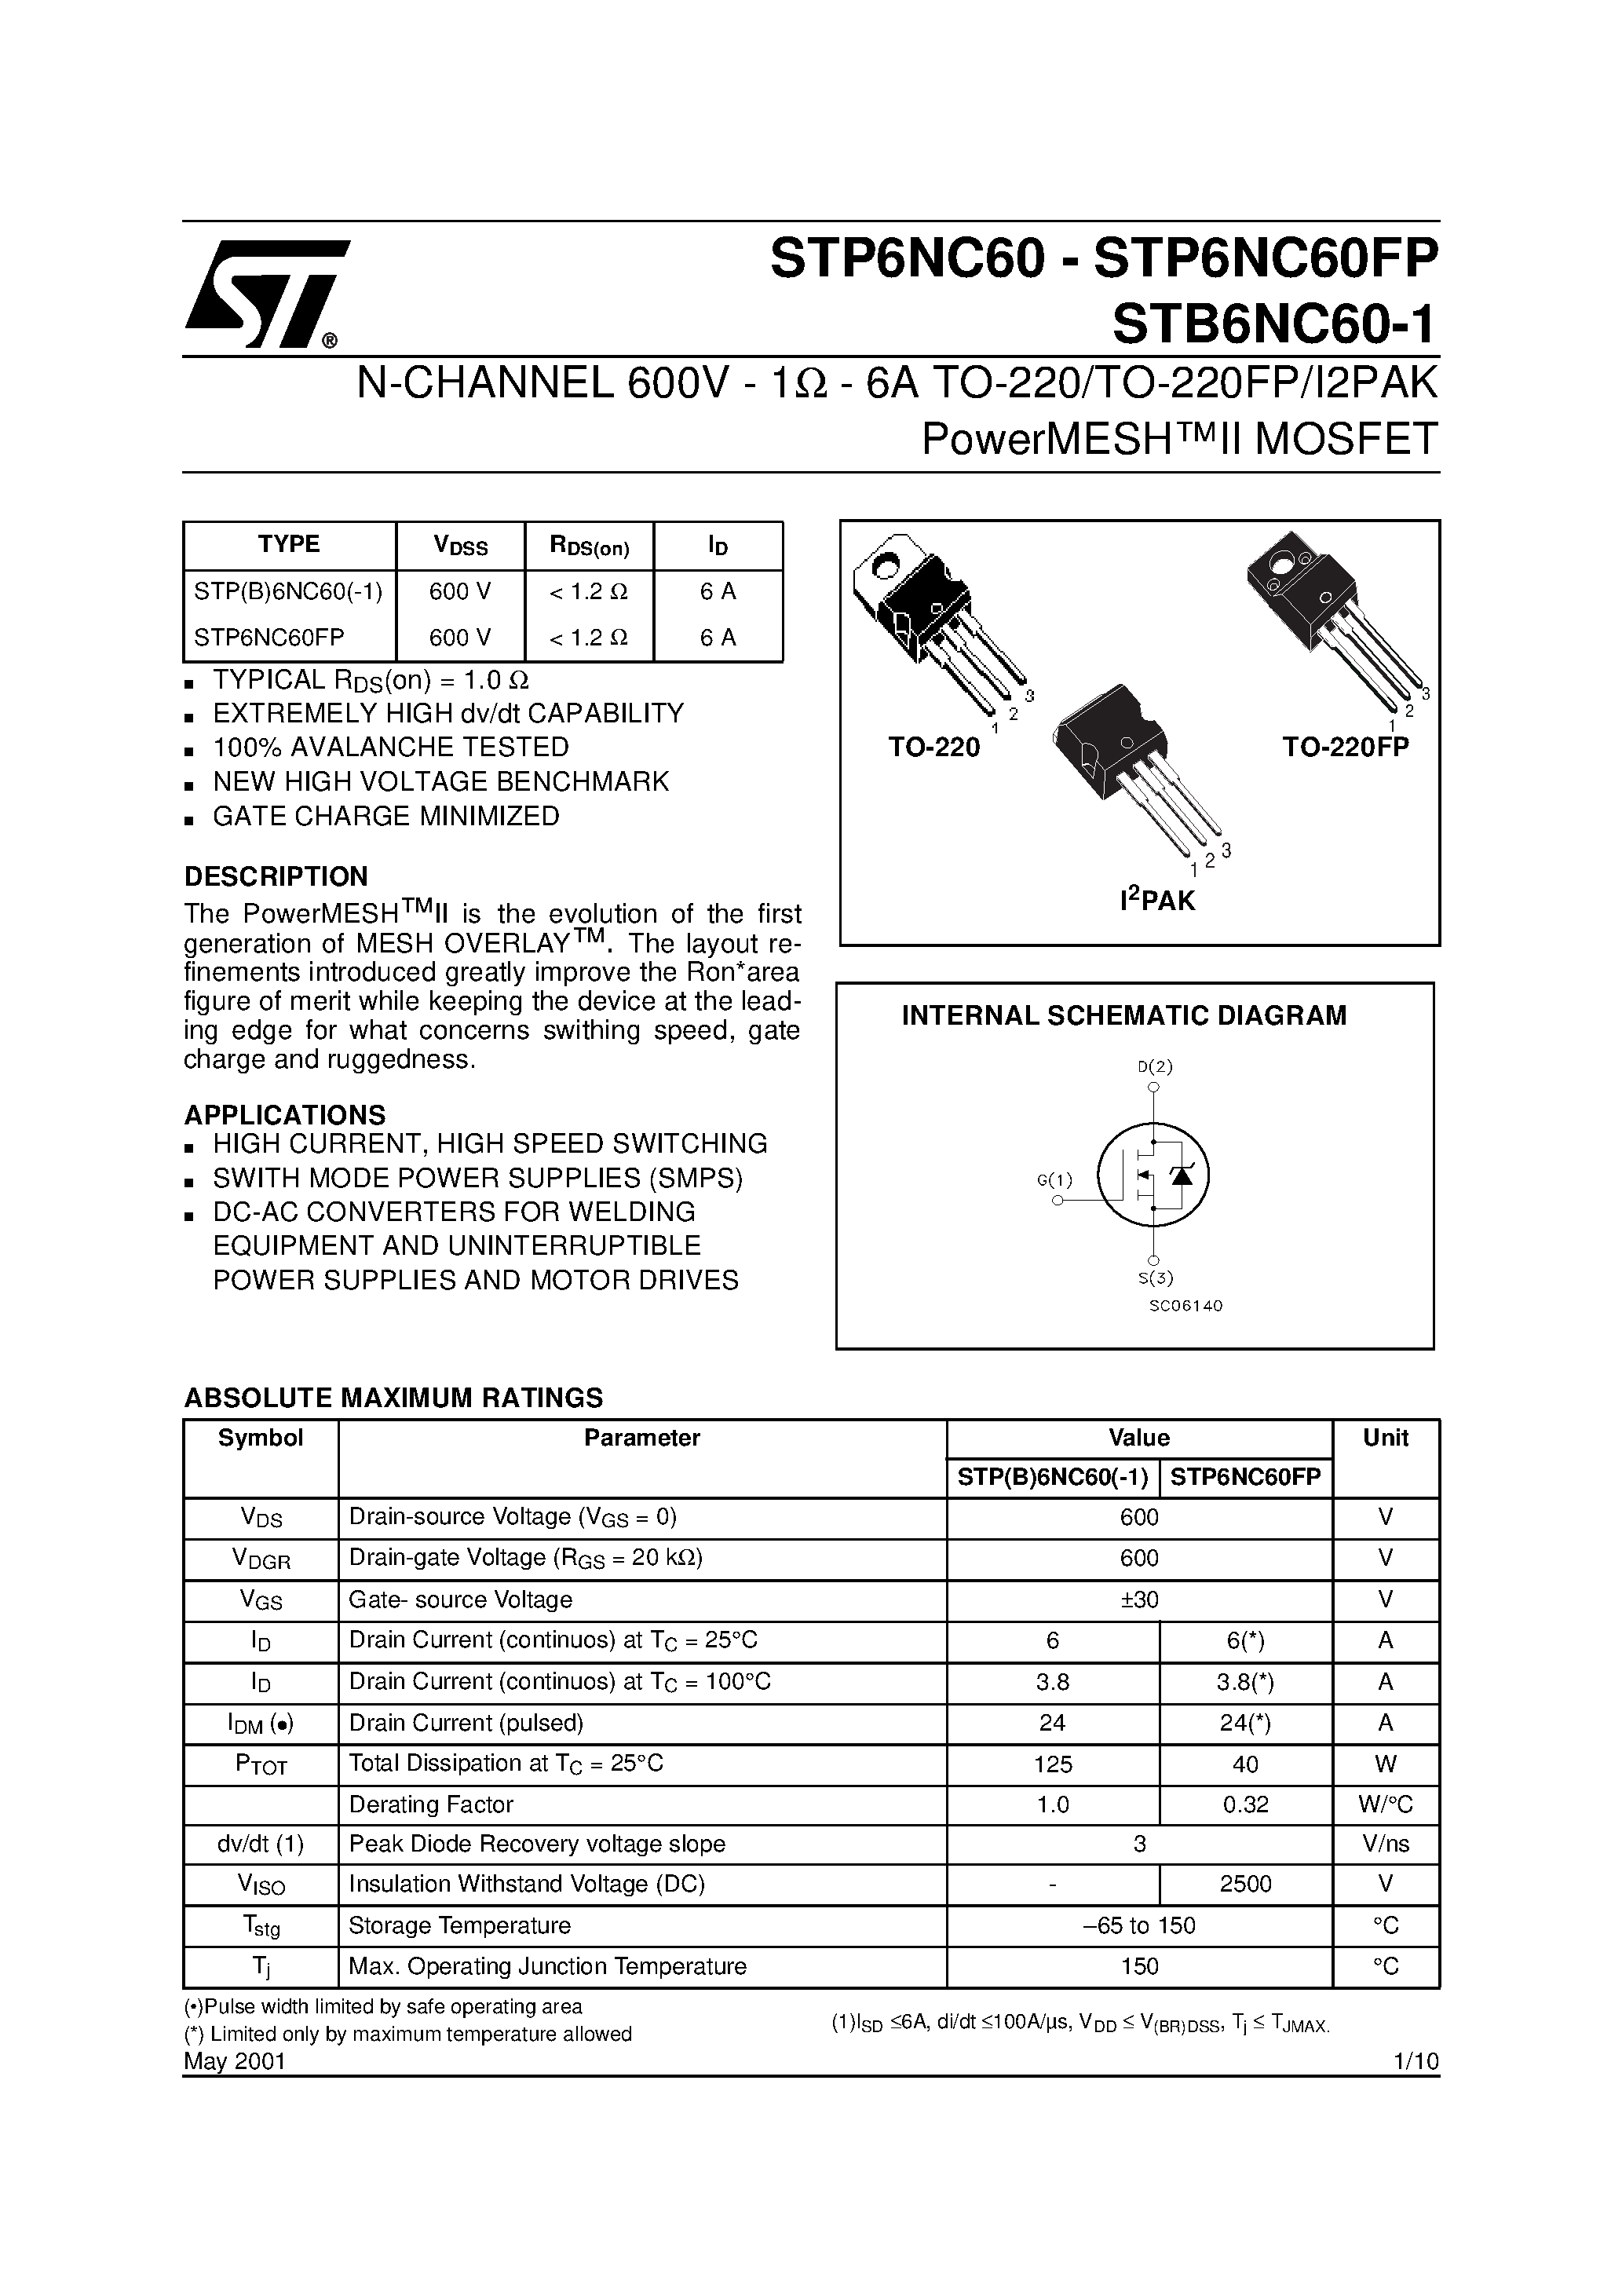 Datasheet STP6NC60 - N-CHANNEL Power MOSFET page 1